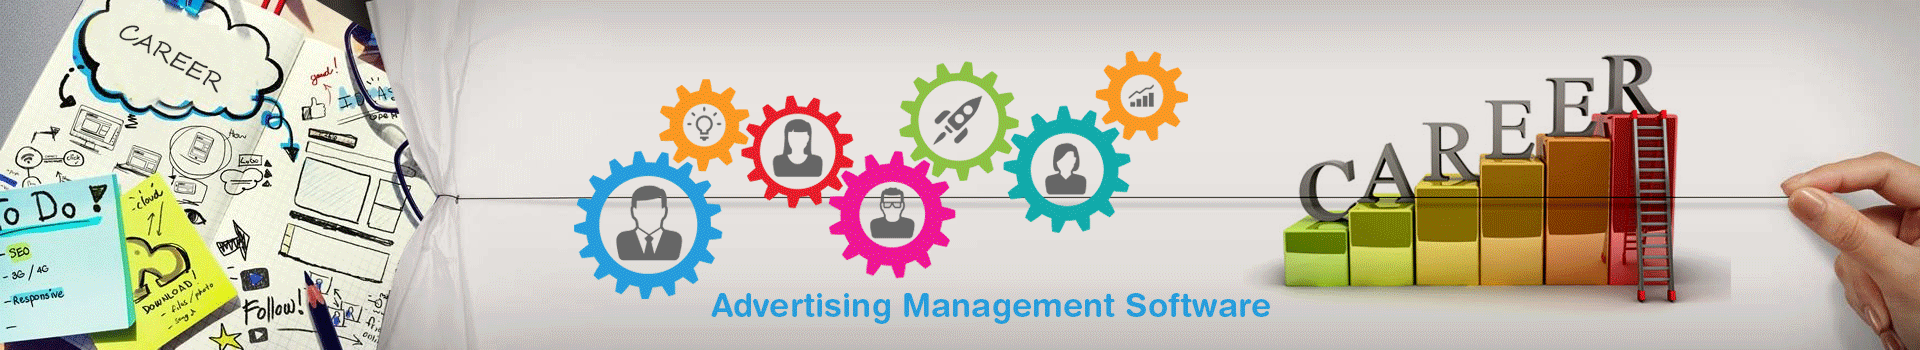 best-advertising-management-software-agency